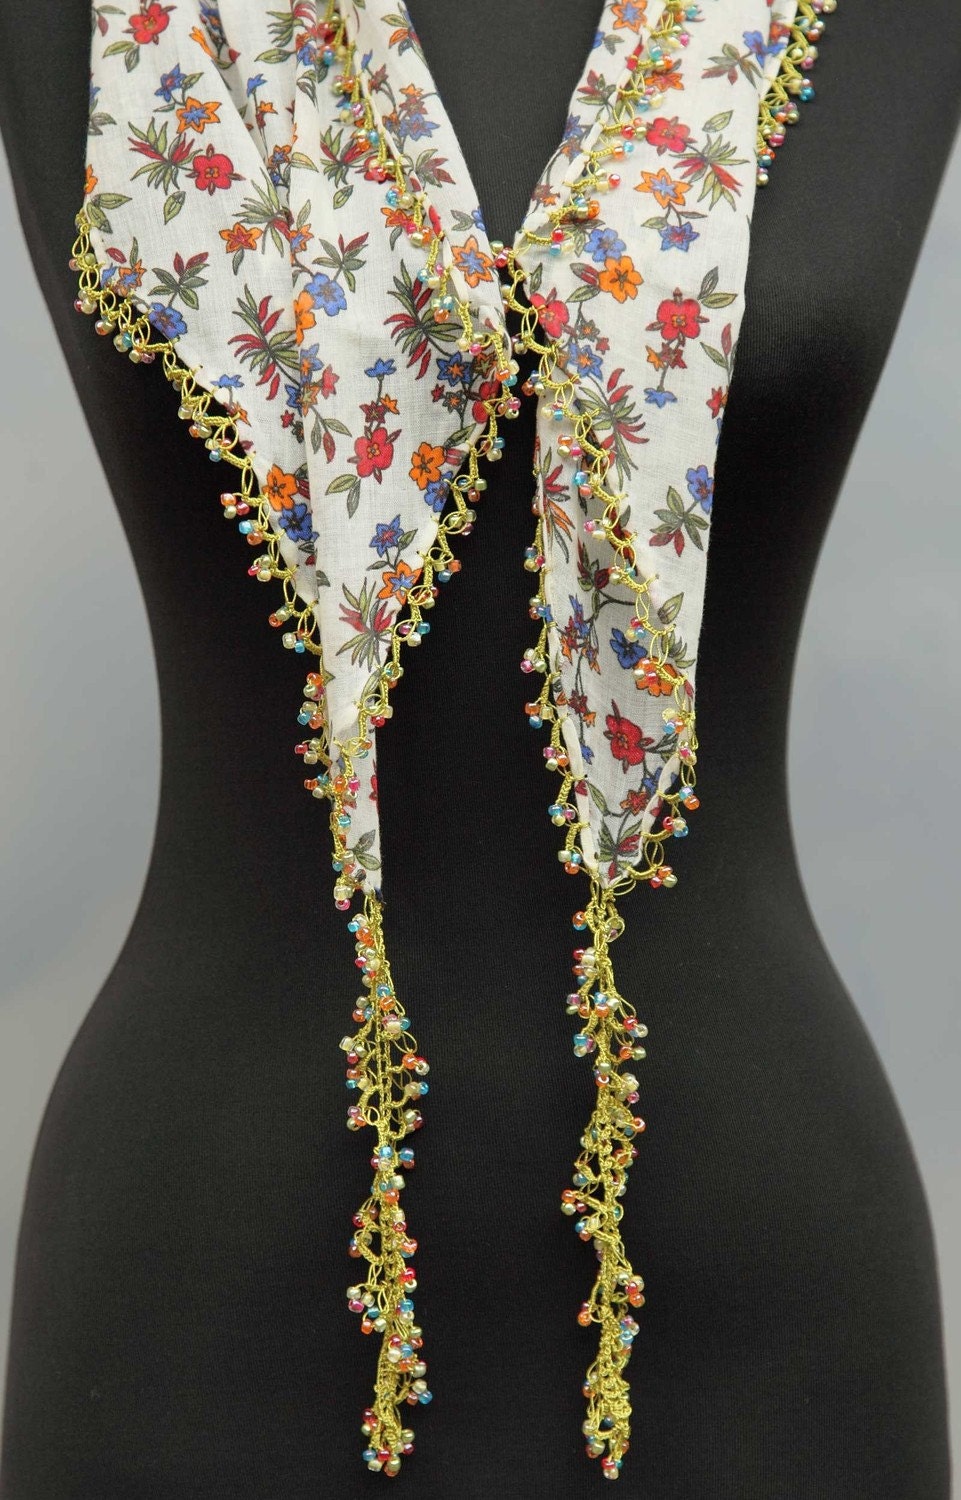 yazma - from Turkey - scarf framed with bead-work on all sides - FREE SHIPMENT - 034-05